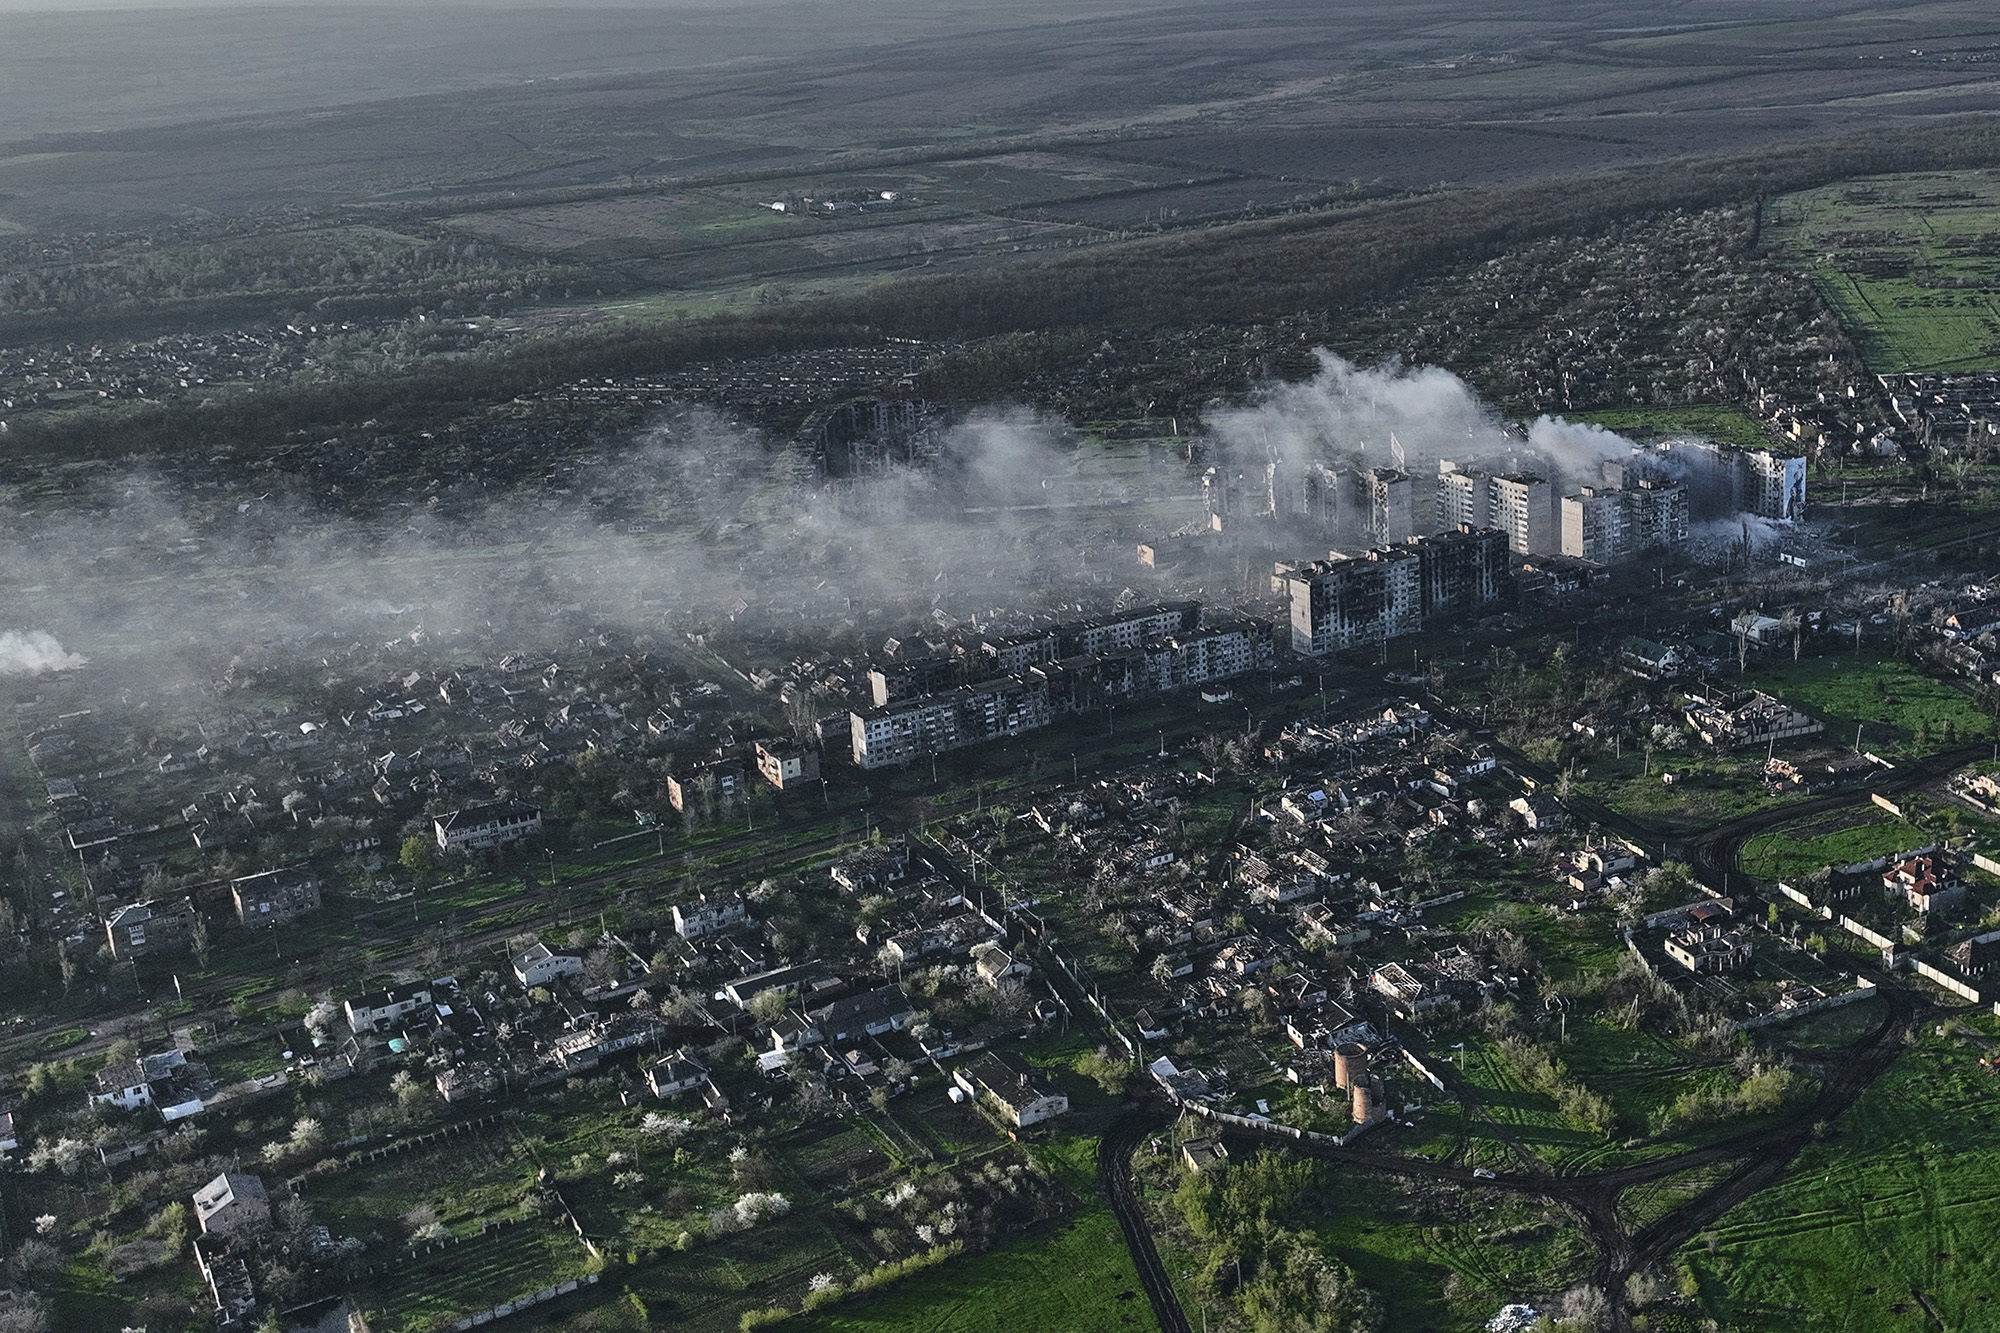 Smoke rises from buildings in this aerial view of Bakhmut, Ukraine, on April 26.